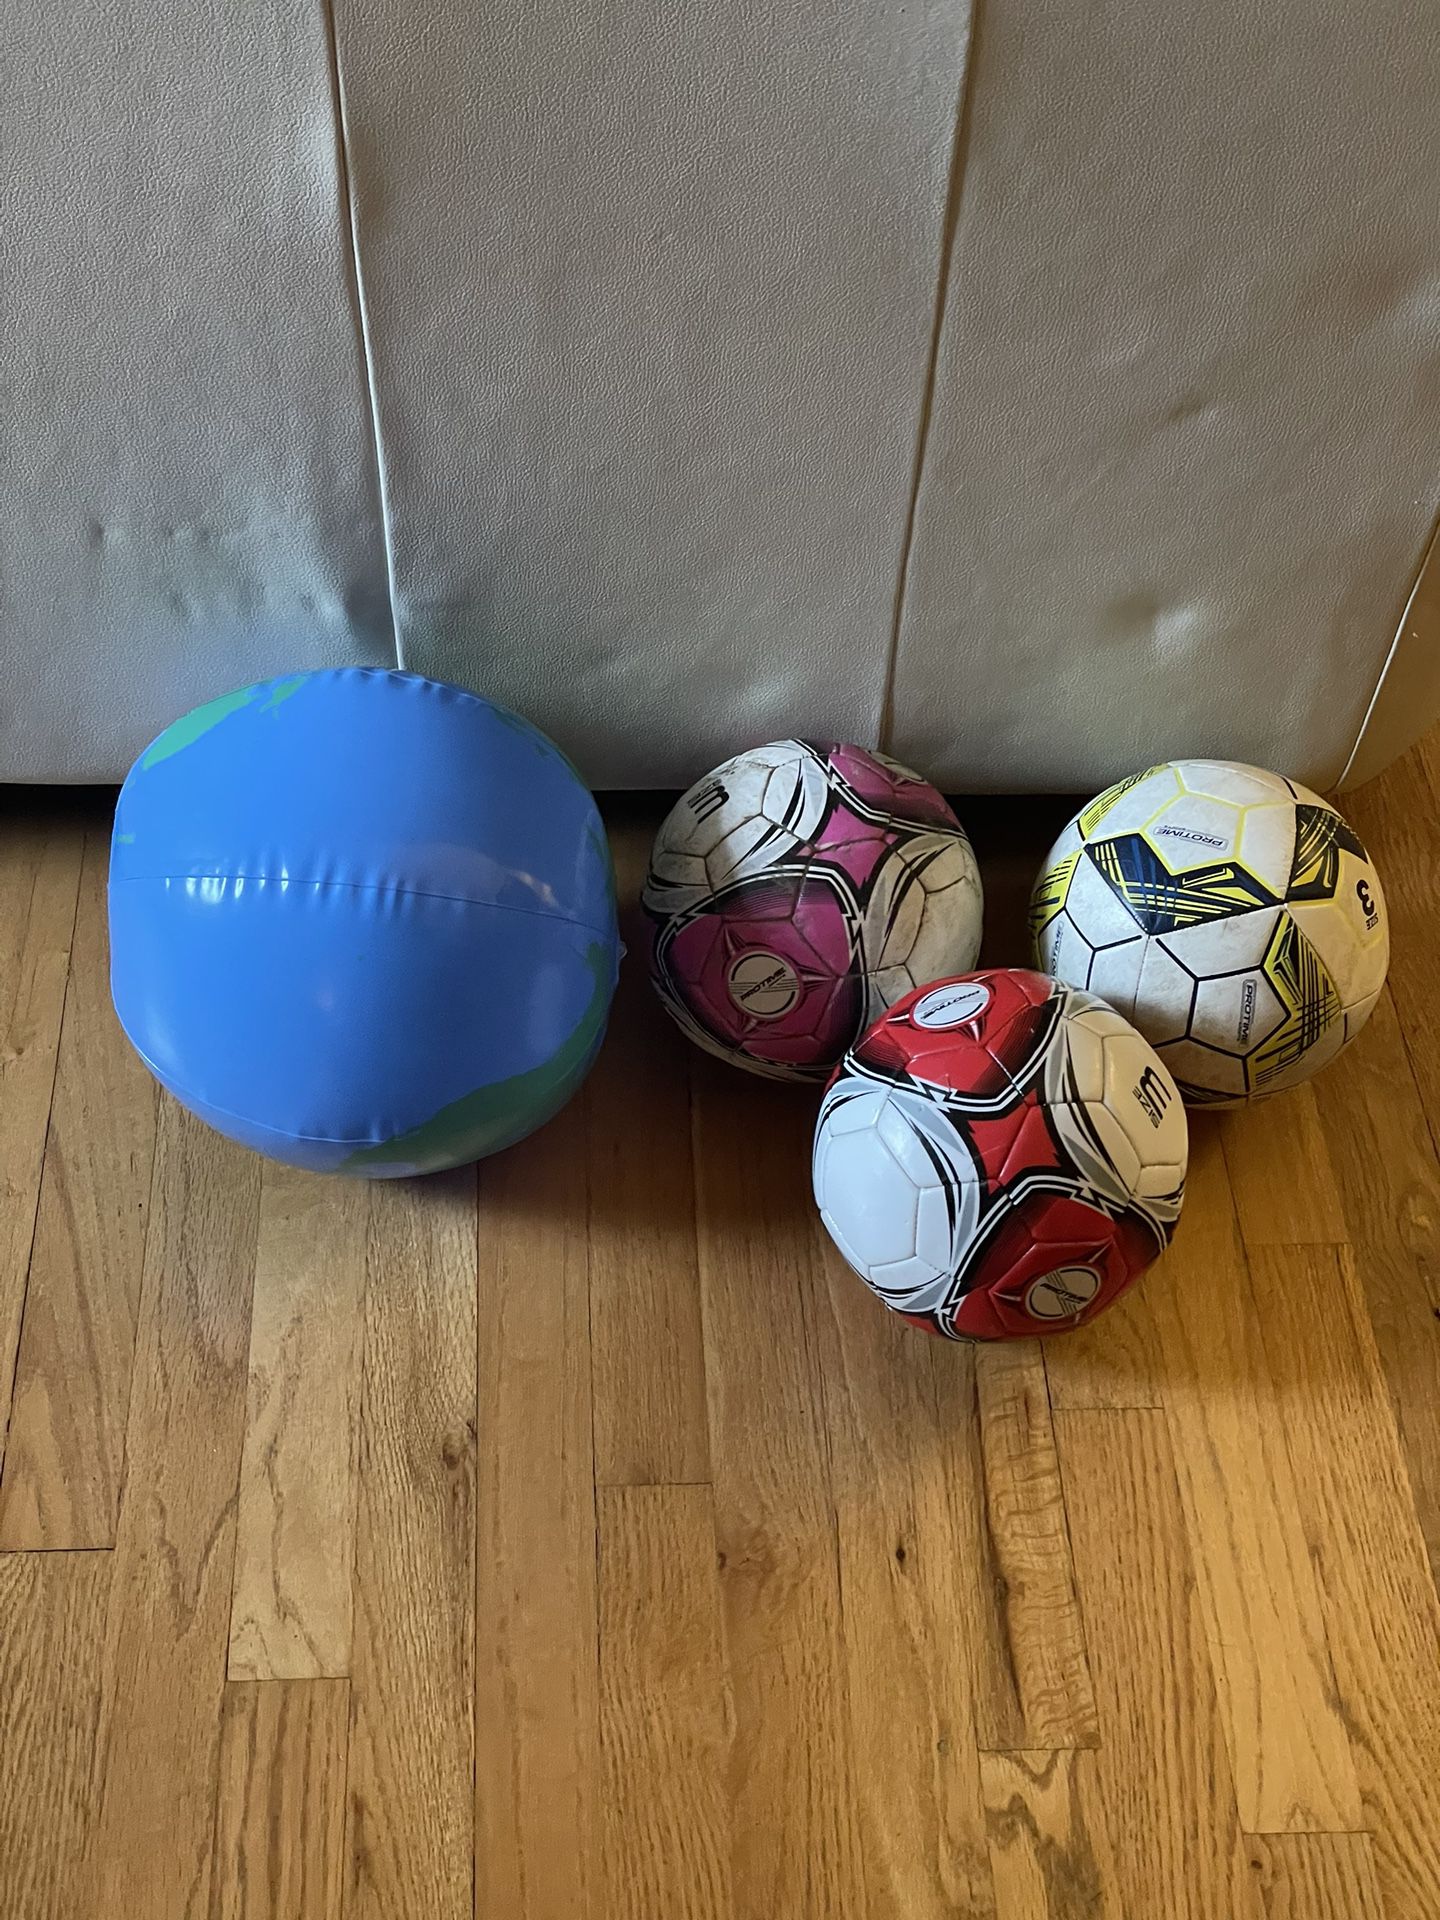 Free Size 3 Soccer Balls And Beach Ball